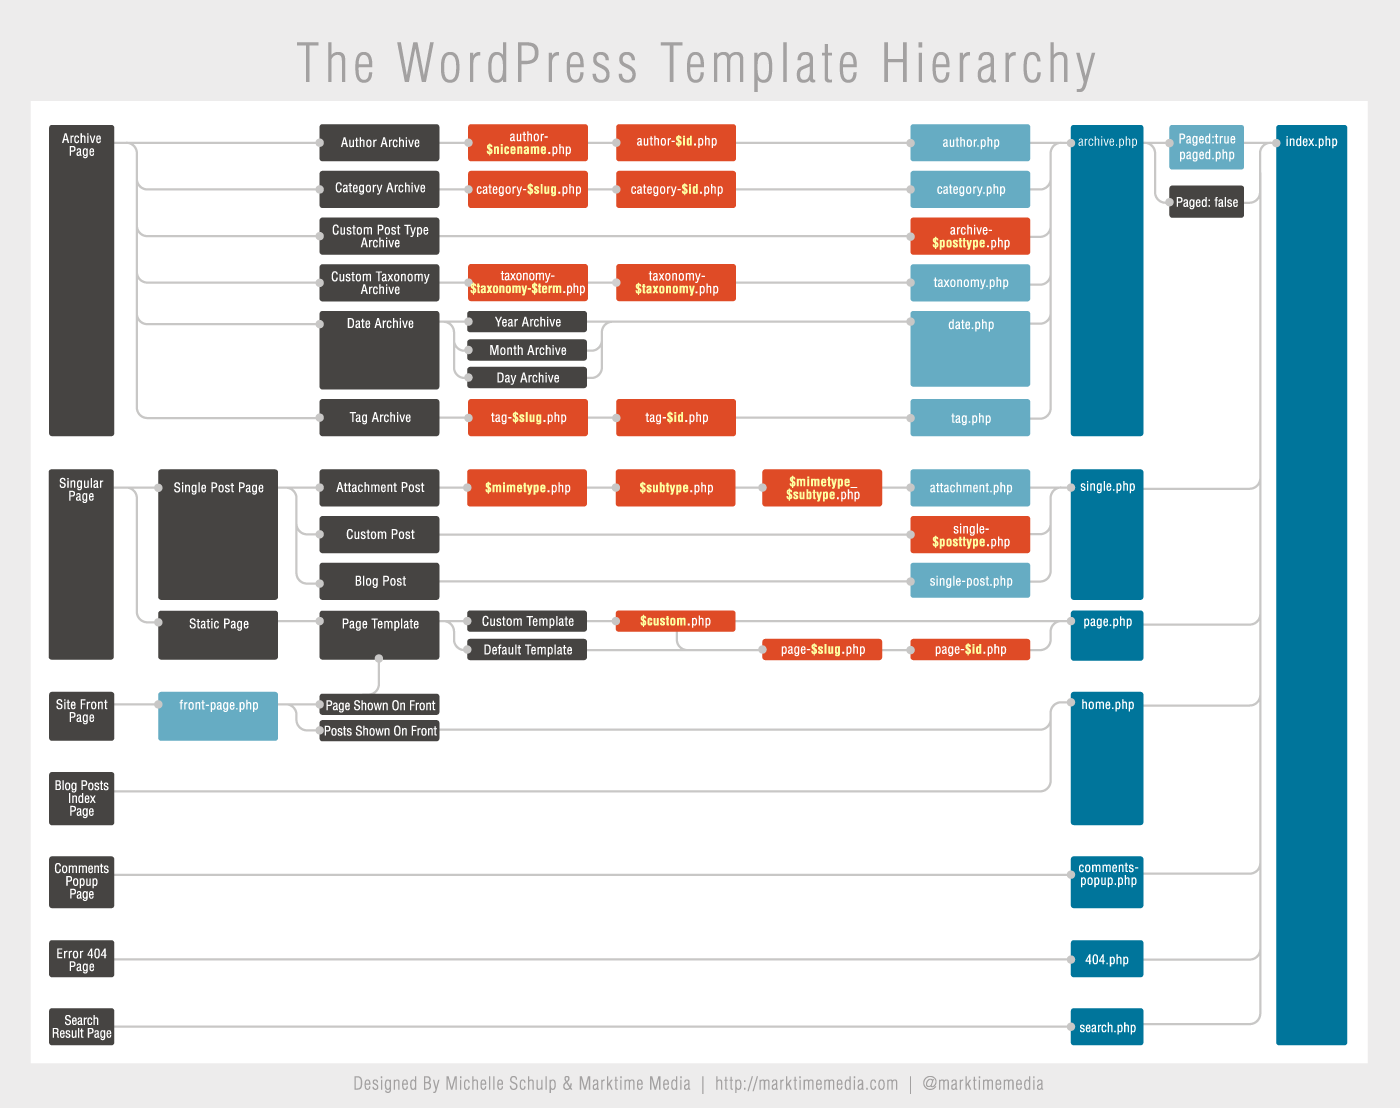 The WordPress Template Hierarchy